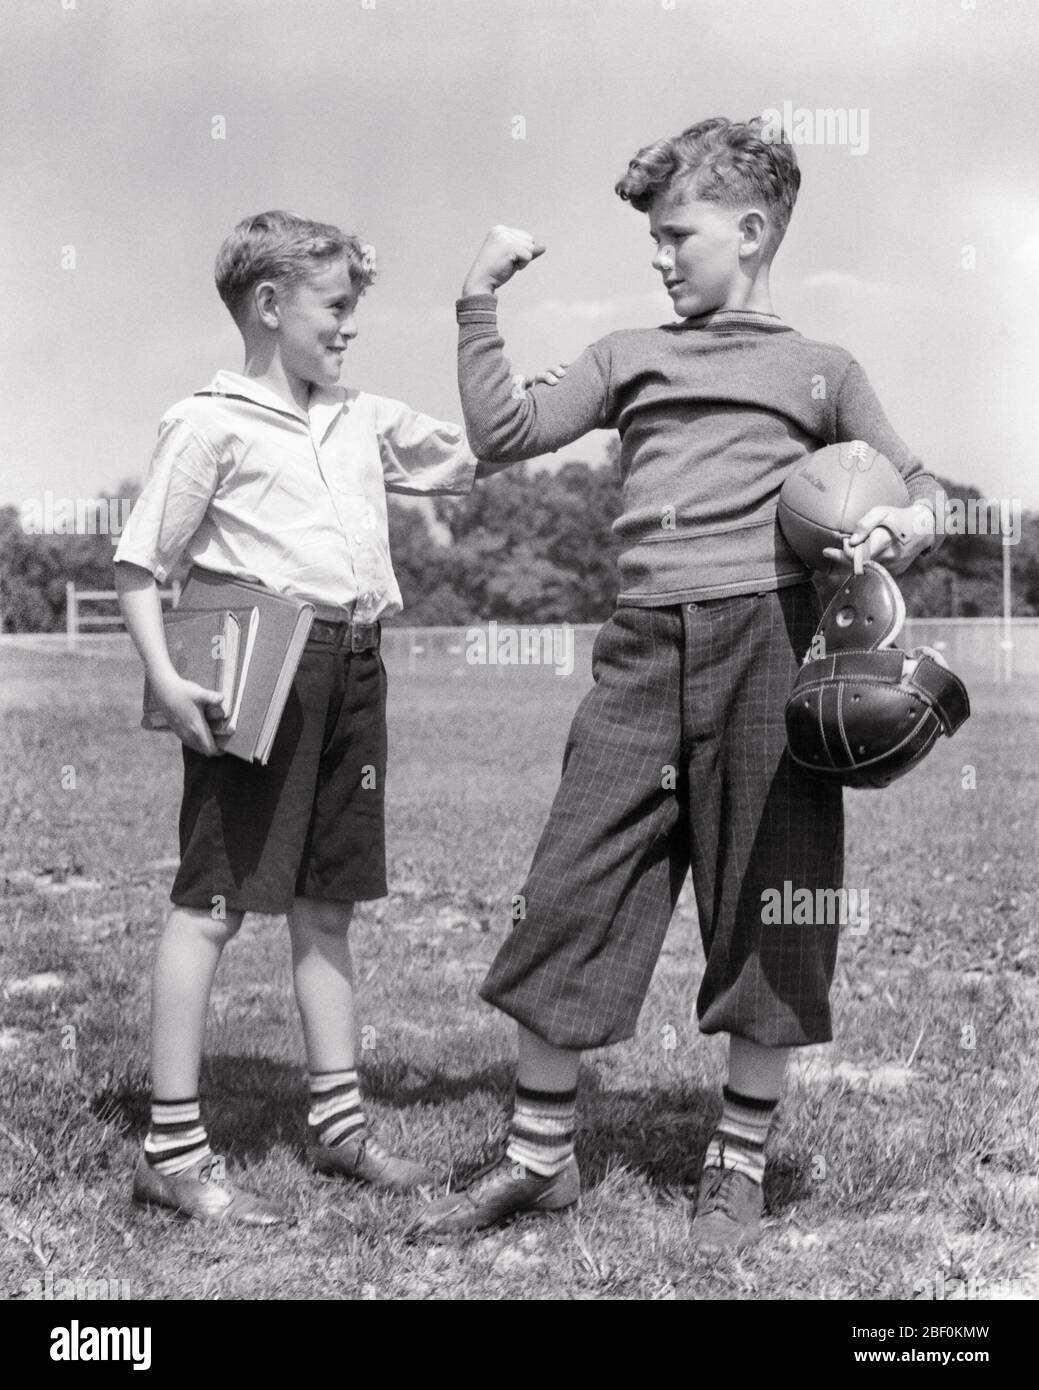 1930s  SCHOOLBOY FEELING ARM MUSCLE BICEP OF HIS OLDER STRONGER  FOOTBALL PLAYER BROTHER - b4463 HAR001 HARS HAPPINESS HIS STRENGTH RECREATION PRIDE BICEP FEELING SIBLING CONNECTION CONCEPTUAL FRIENDLY MUSCLES STYLISH COOPERATION GROWTH JUVENILES PRE-TEEN PRE-TEEN BOY TOGETHERNESS BLACK AND WHITE CAUCASIAN ETHNICITY HAR001 OLD FASHIONED Stock Photo